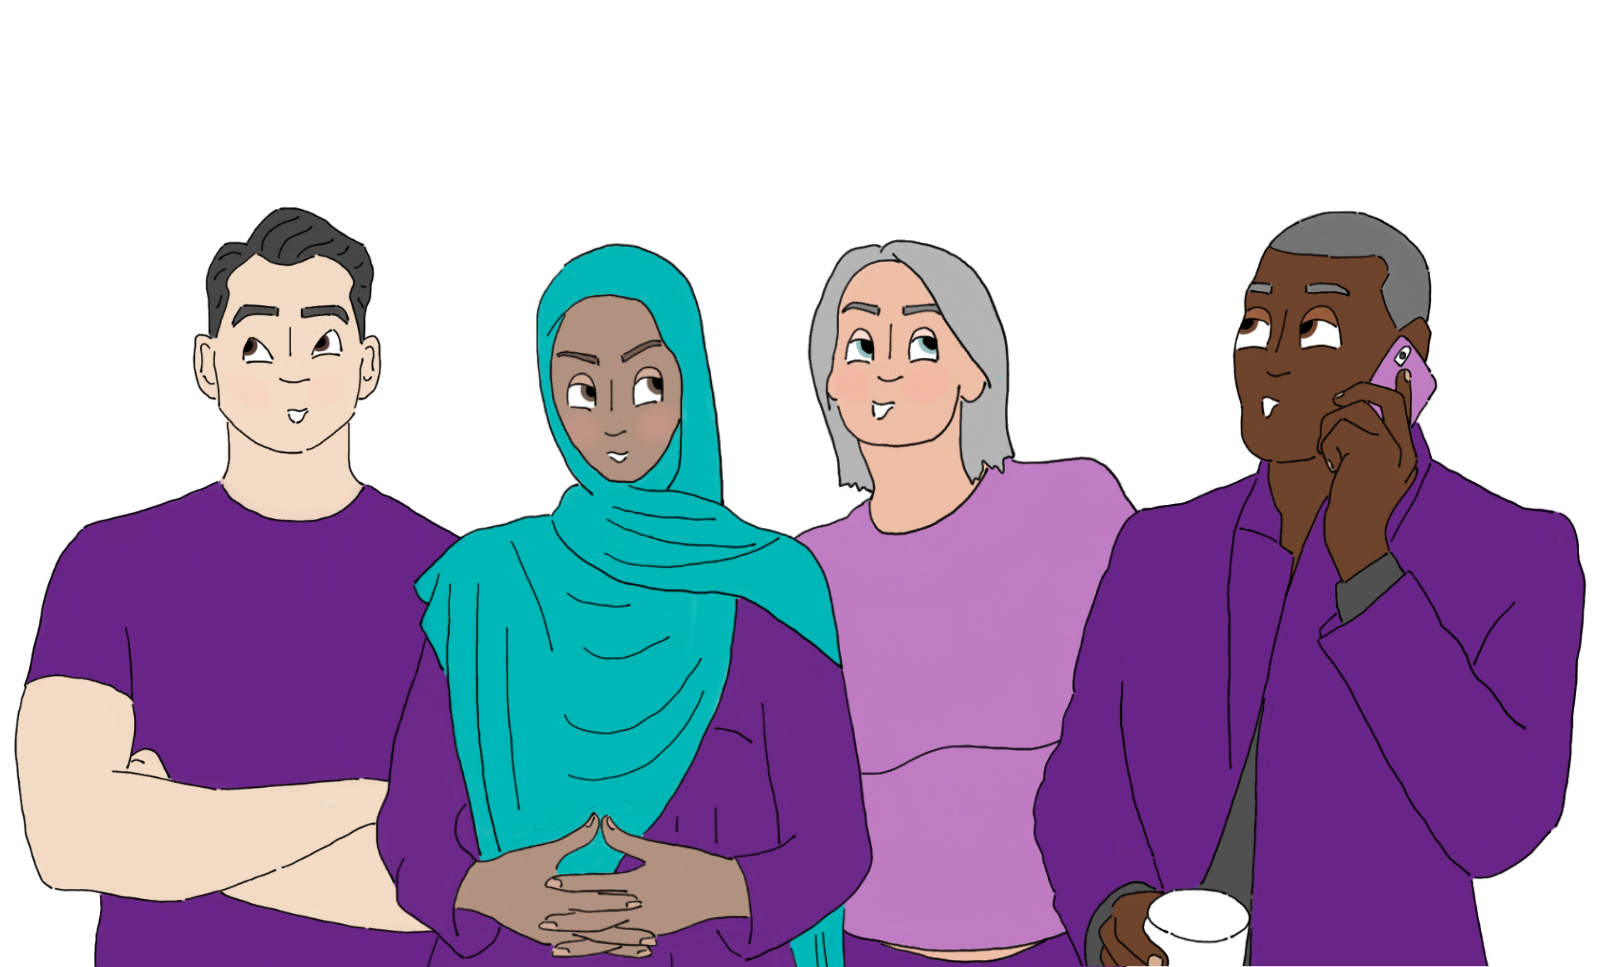 Illustration of four people standing together. The individuals are of different genders, ethnicities and ages.